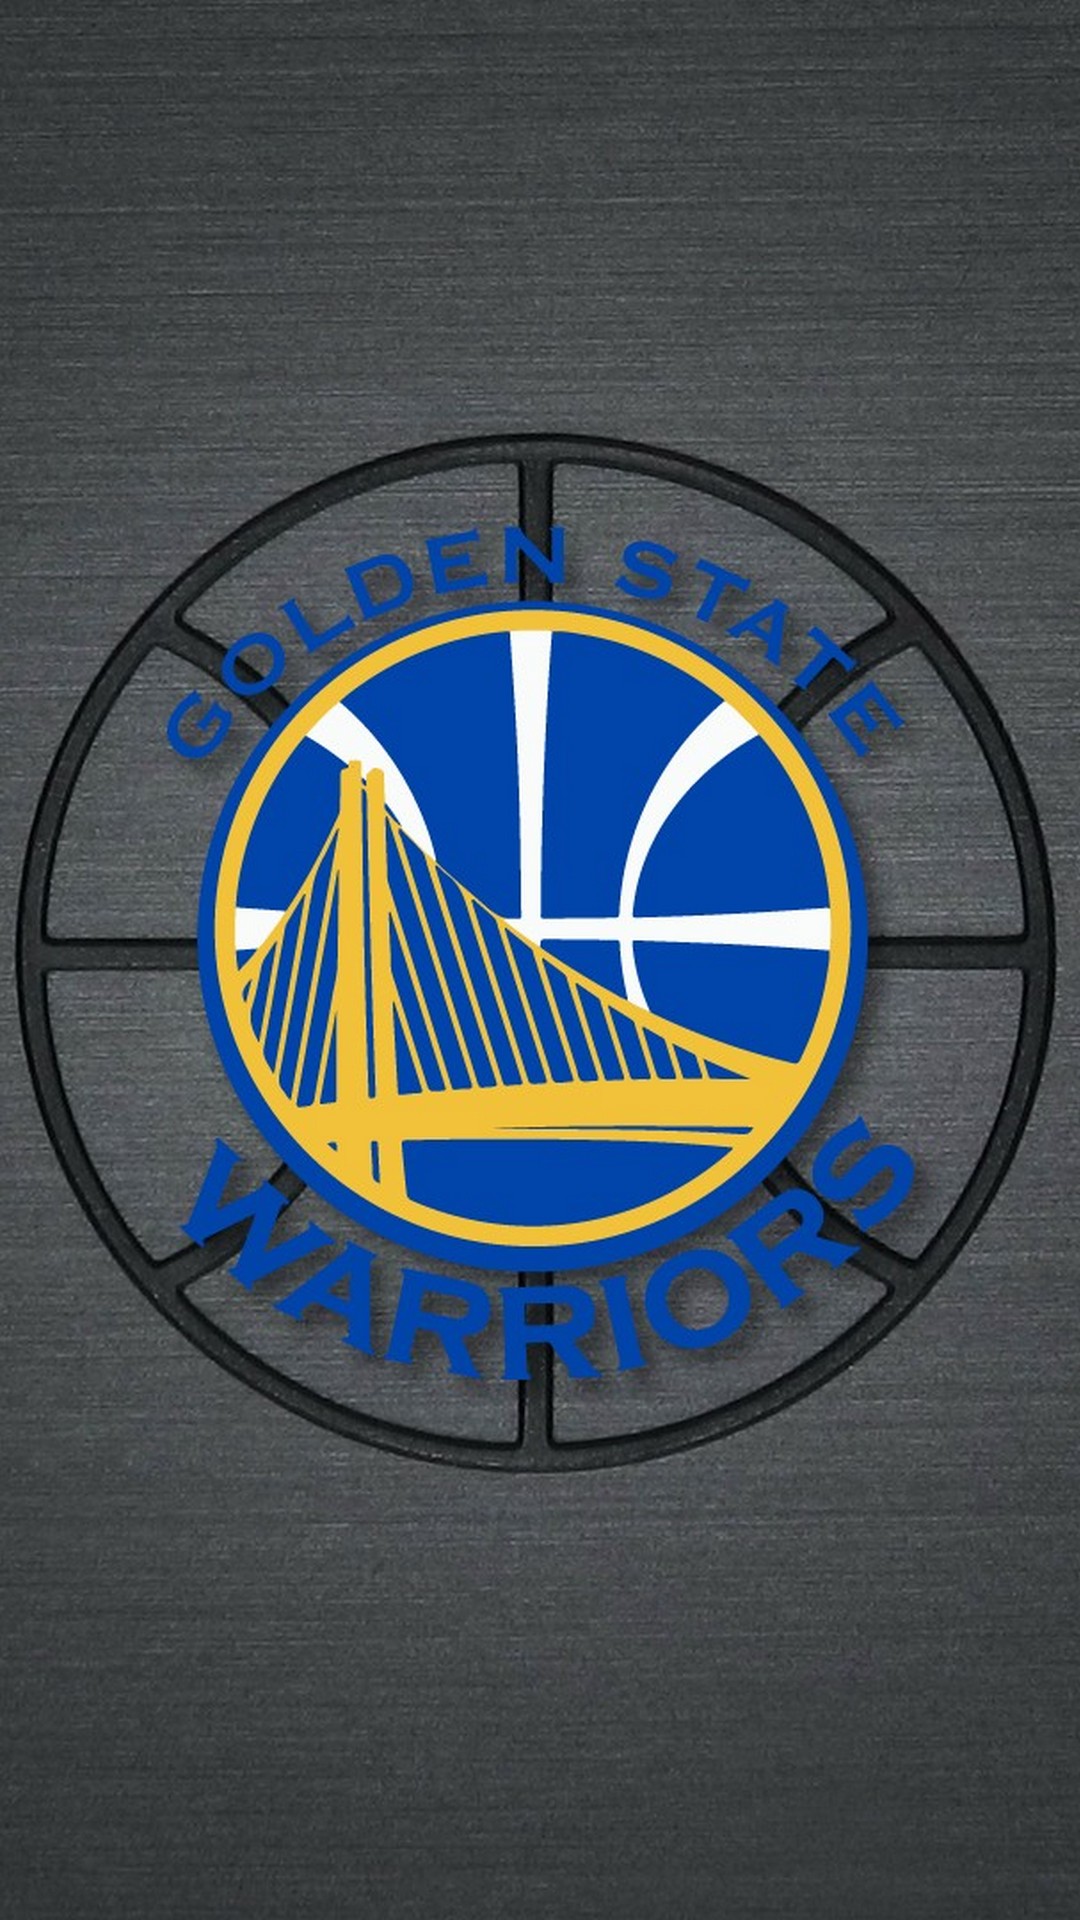 Golden State Warriors iPhone 7 Plus Wallpaper with image resolution 1080x1920 pixel. You can use this wallpaper as background for your desktop Computer Screensavers, Android or iPhone smartphones